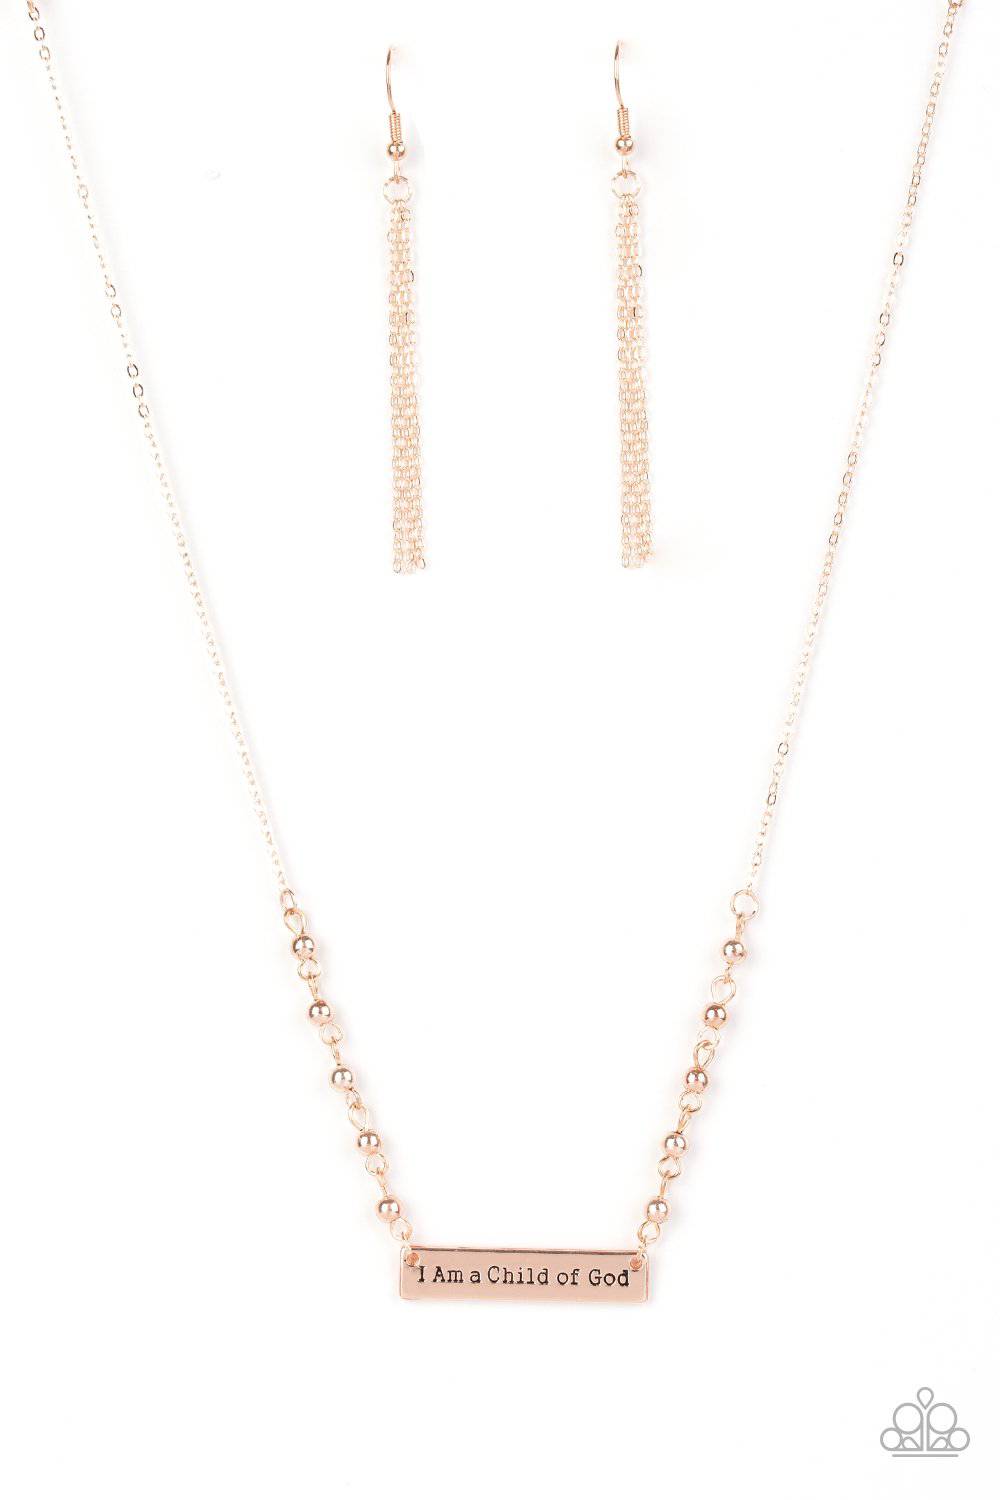 Send Me An Angel - Rose Gold Necklace - Paparazzi Accessories - GlaMarous Titi Jewels